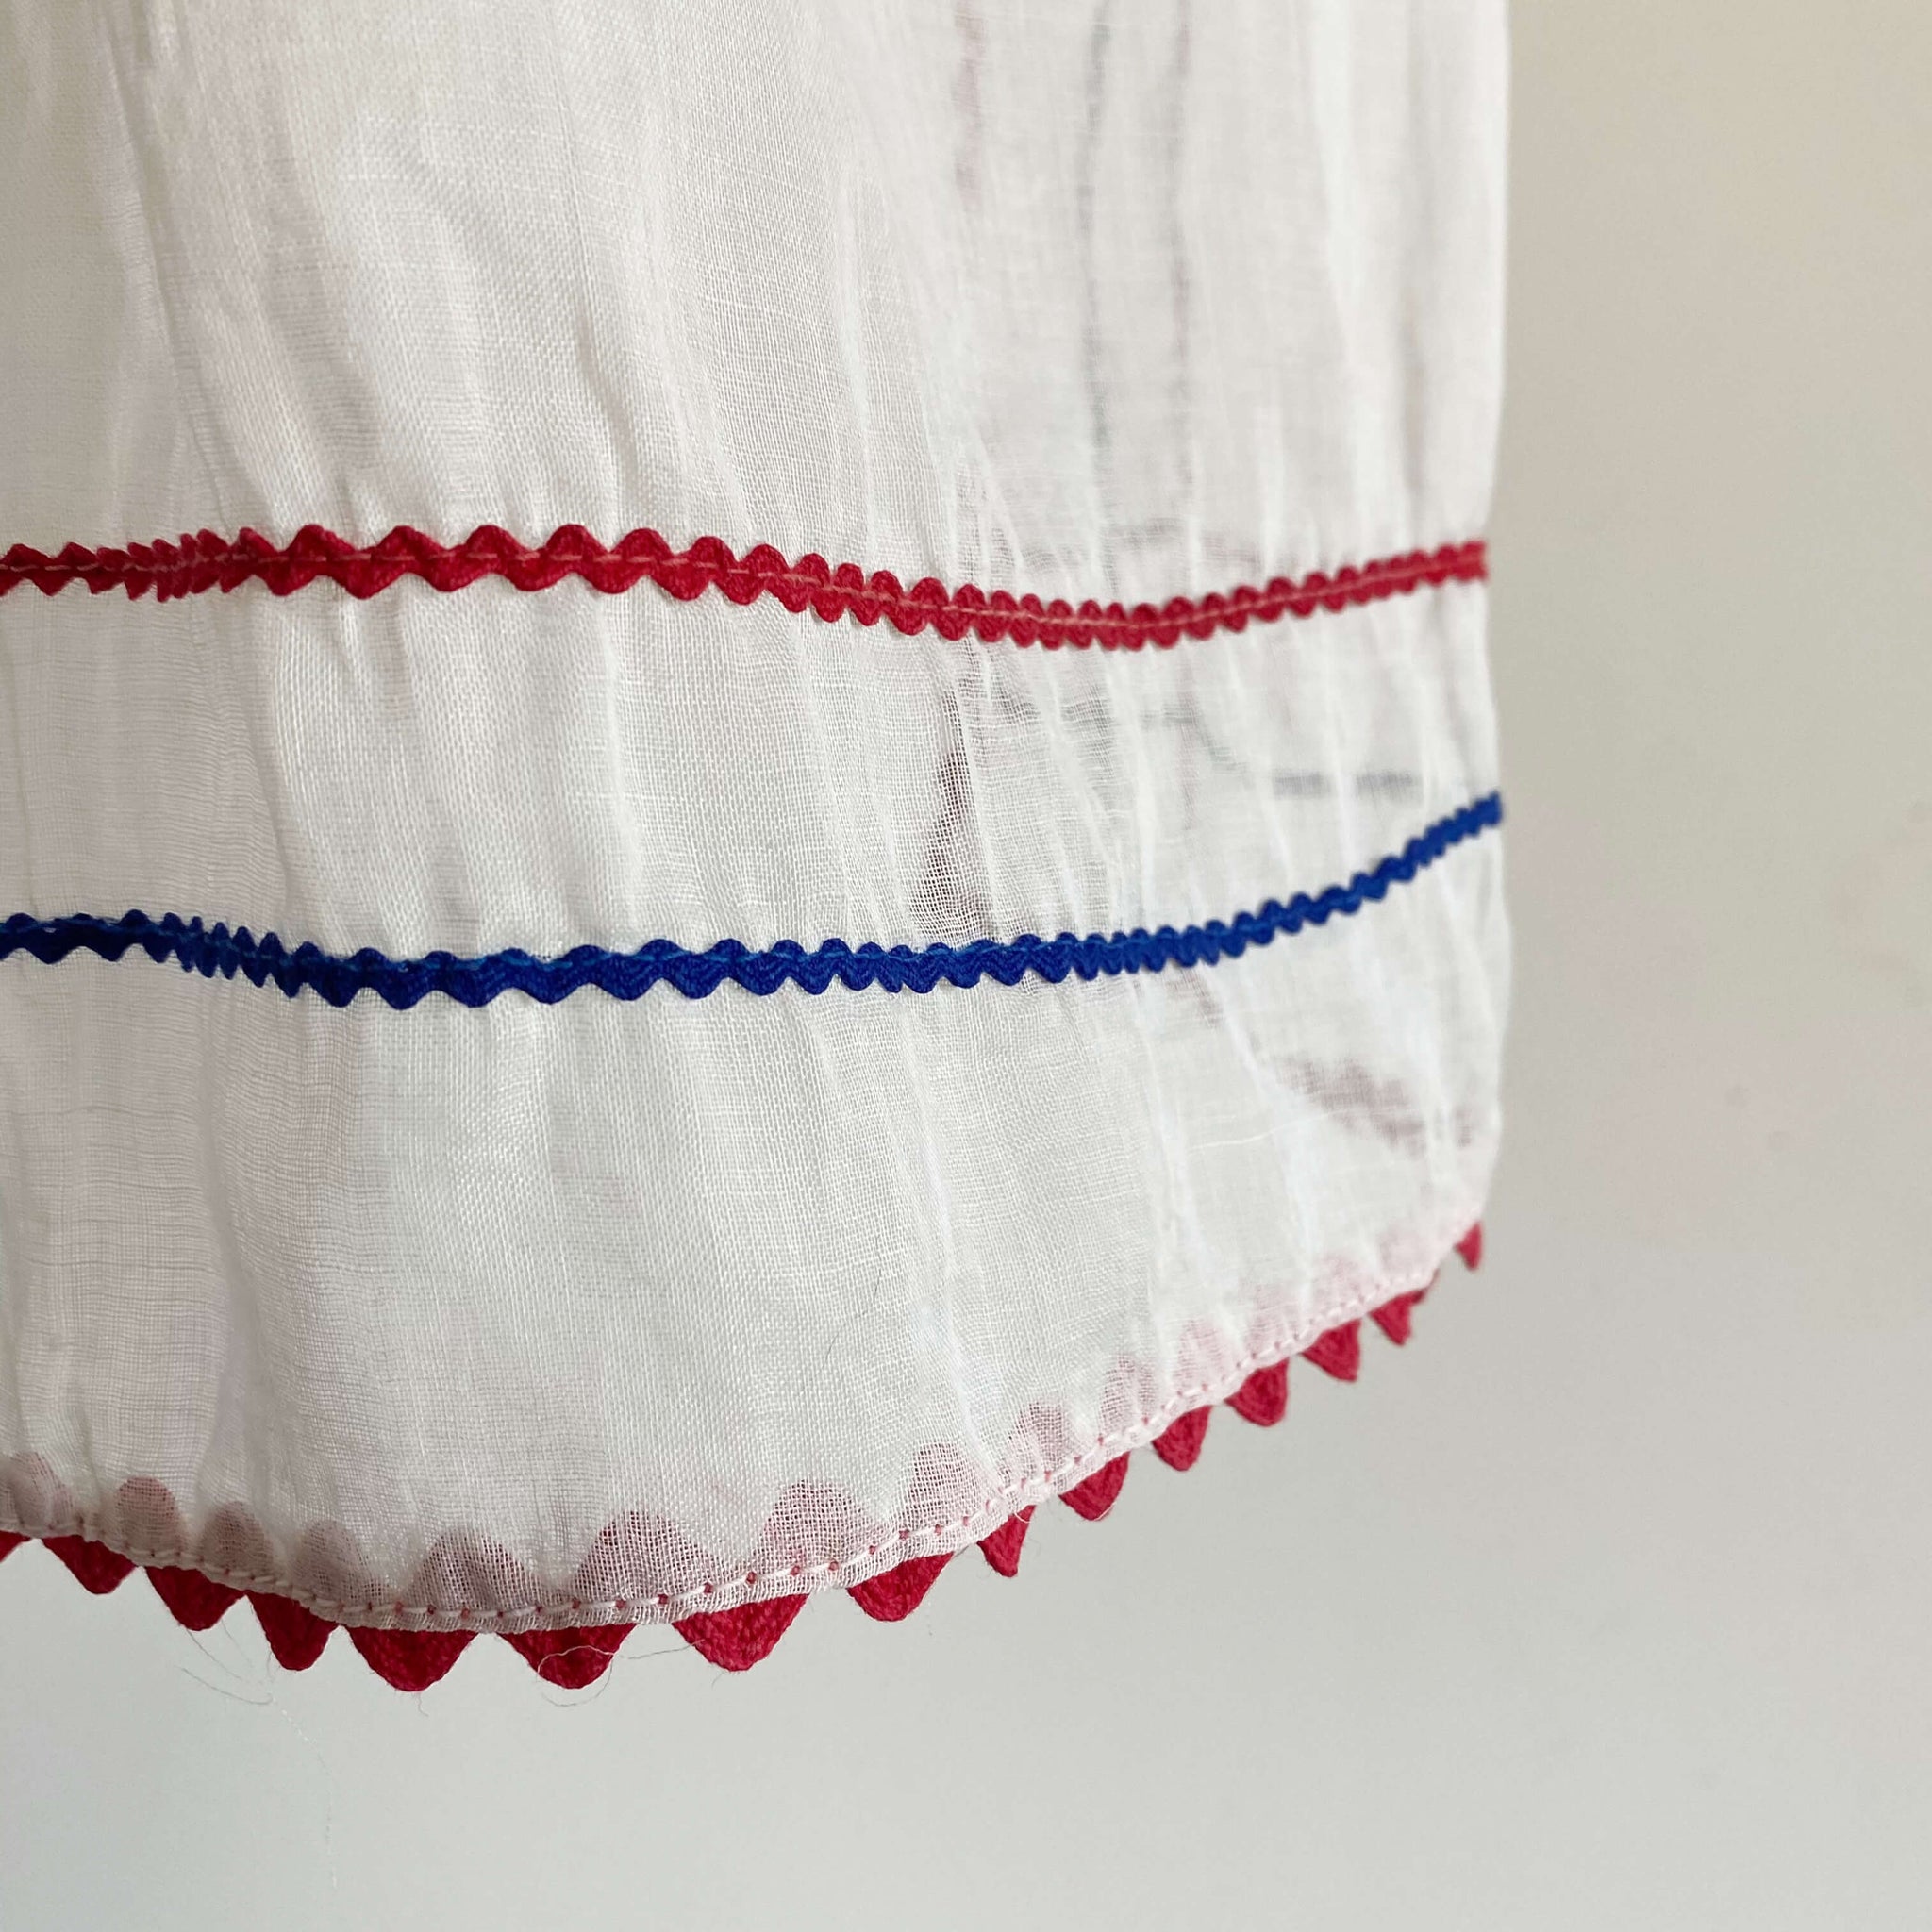 Vintage Sheer Half Apron with Red and Blue Ric Rac Stripes circa 1940s